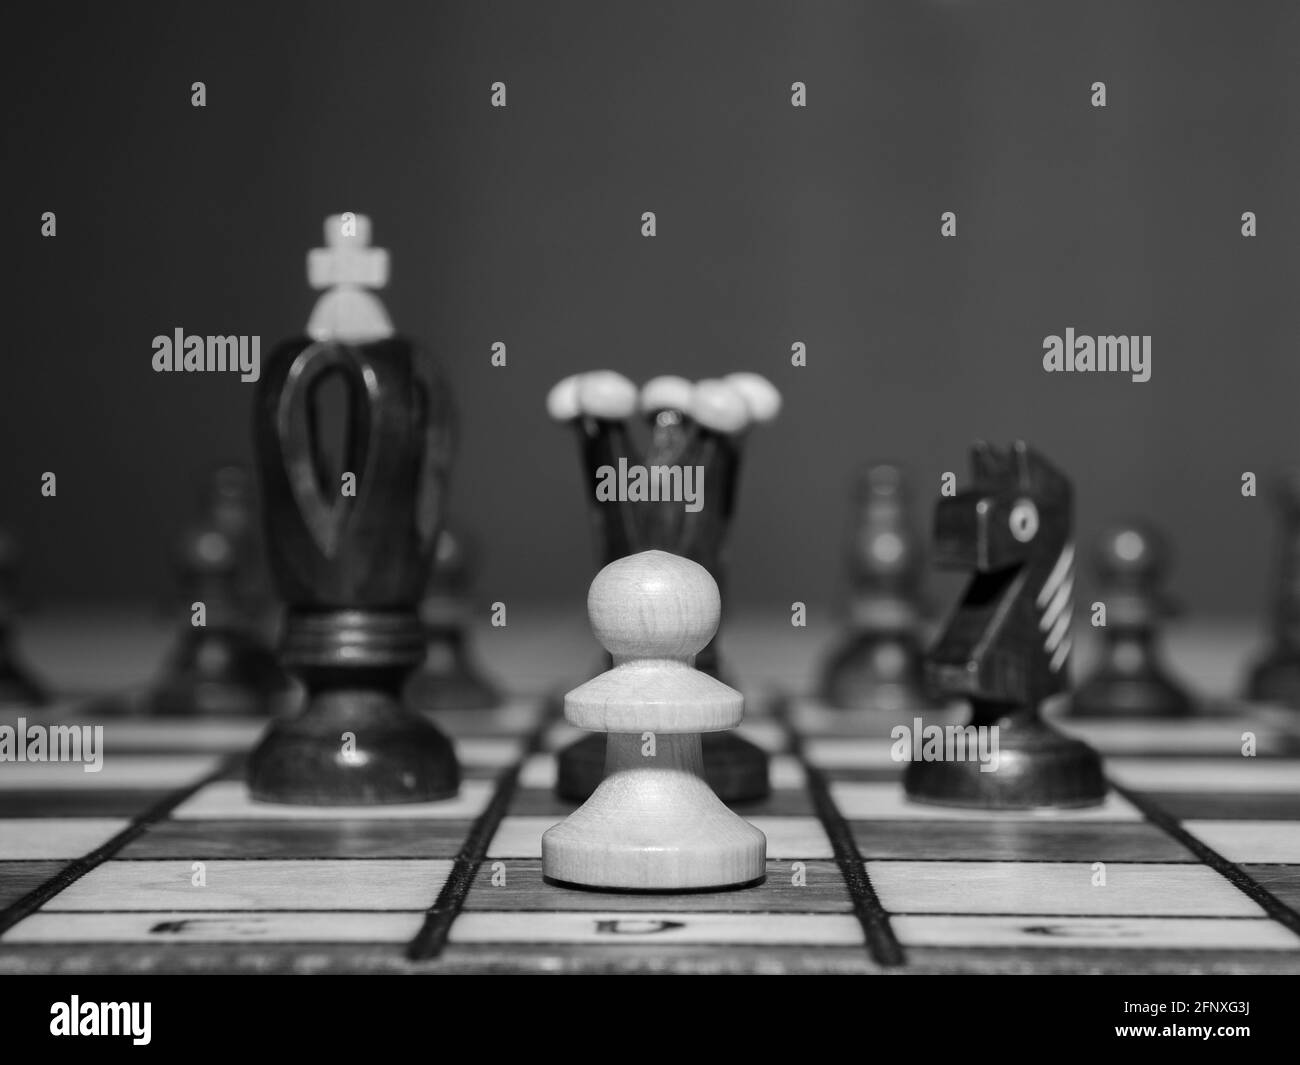 Black and white photo of a chessboard. White pawn on the background of chess pieces. Stock Photo